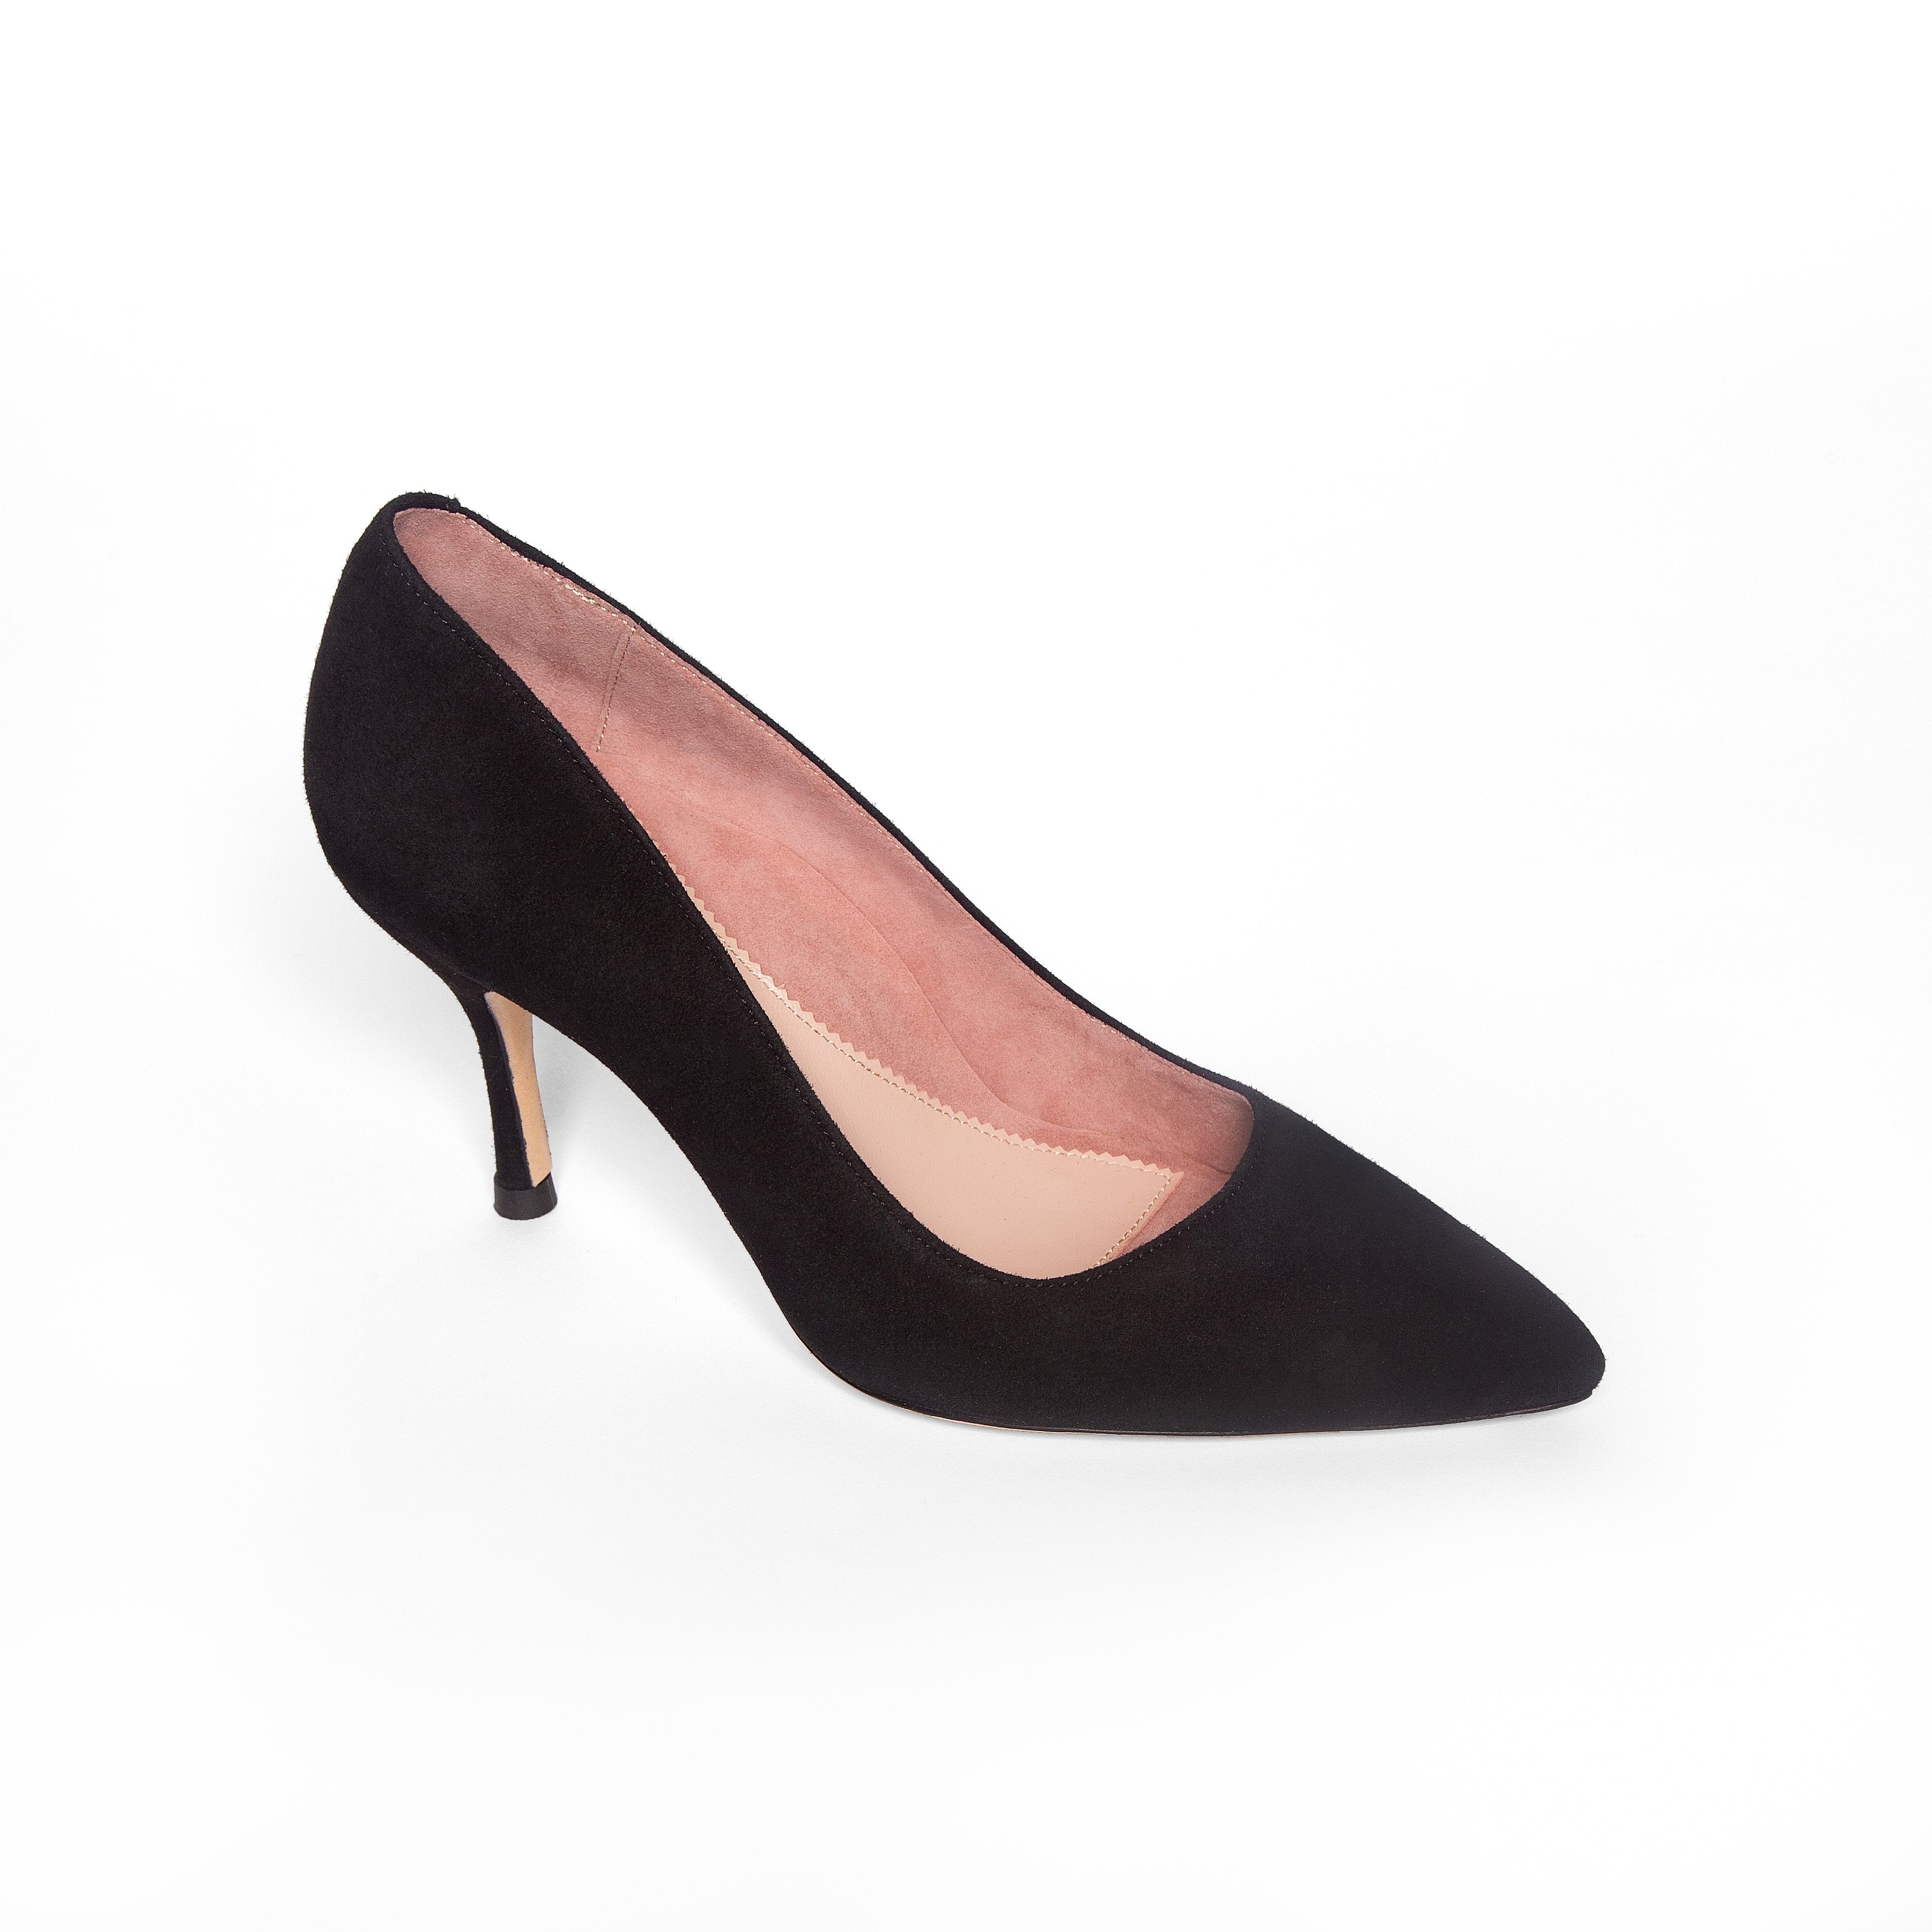 Women' Business Suede Pump - Black NORA GARDNER | OFFICIAL STORE for work and office